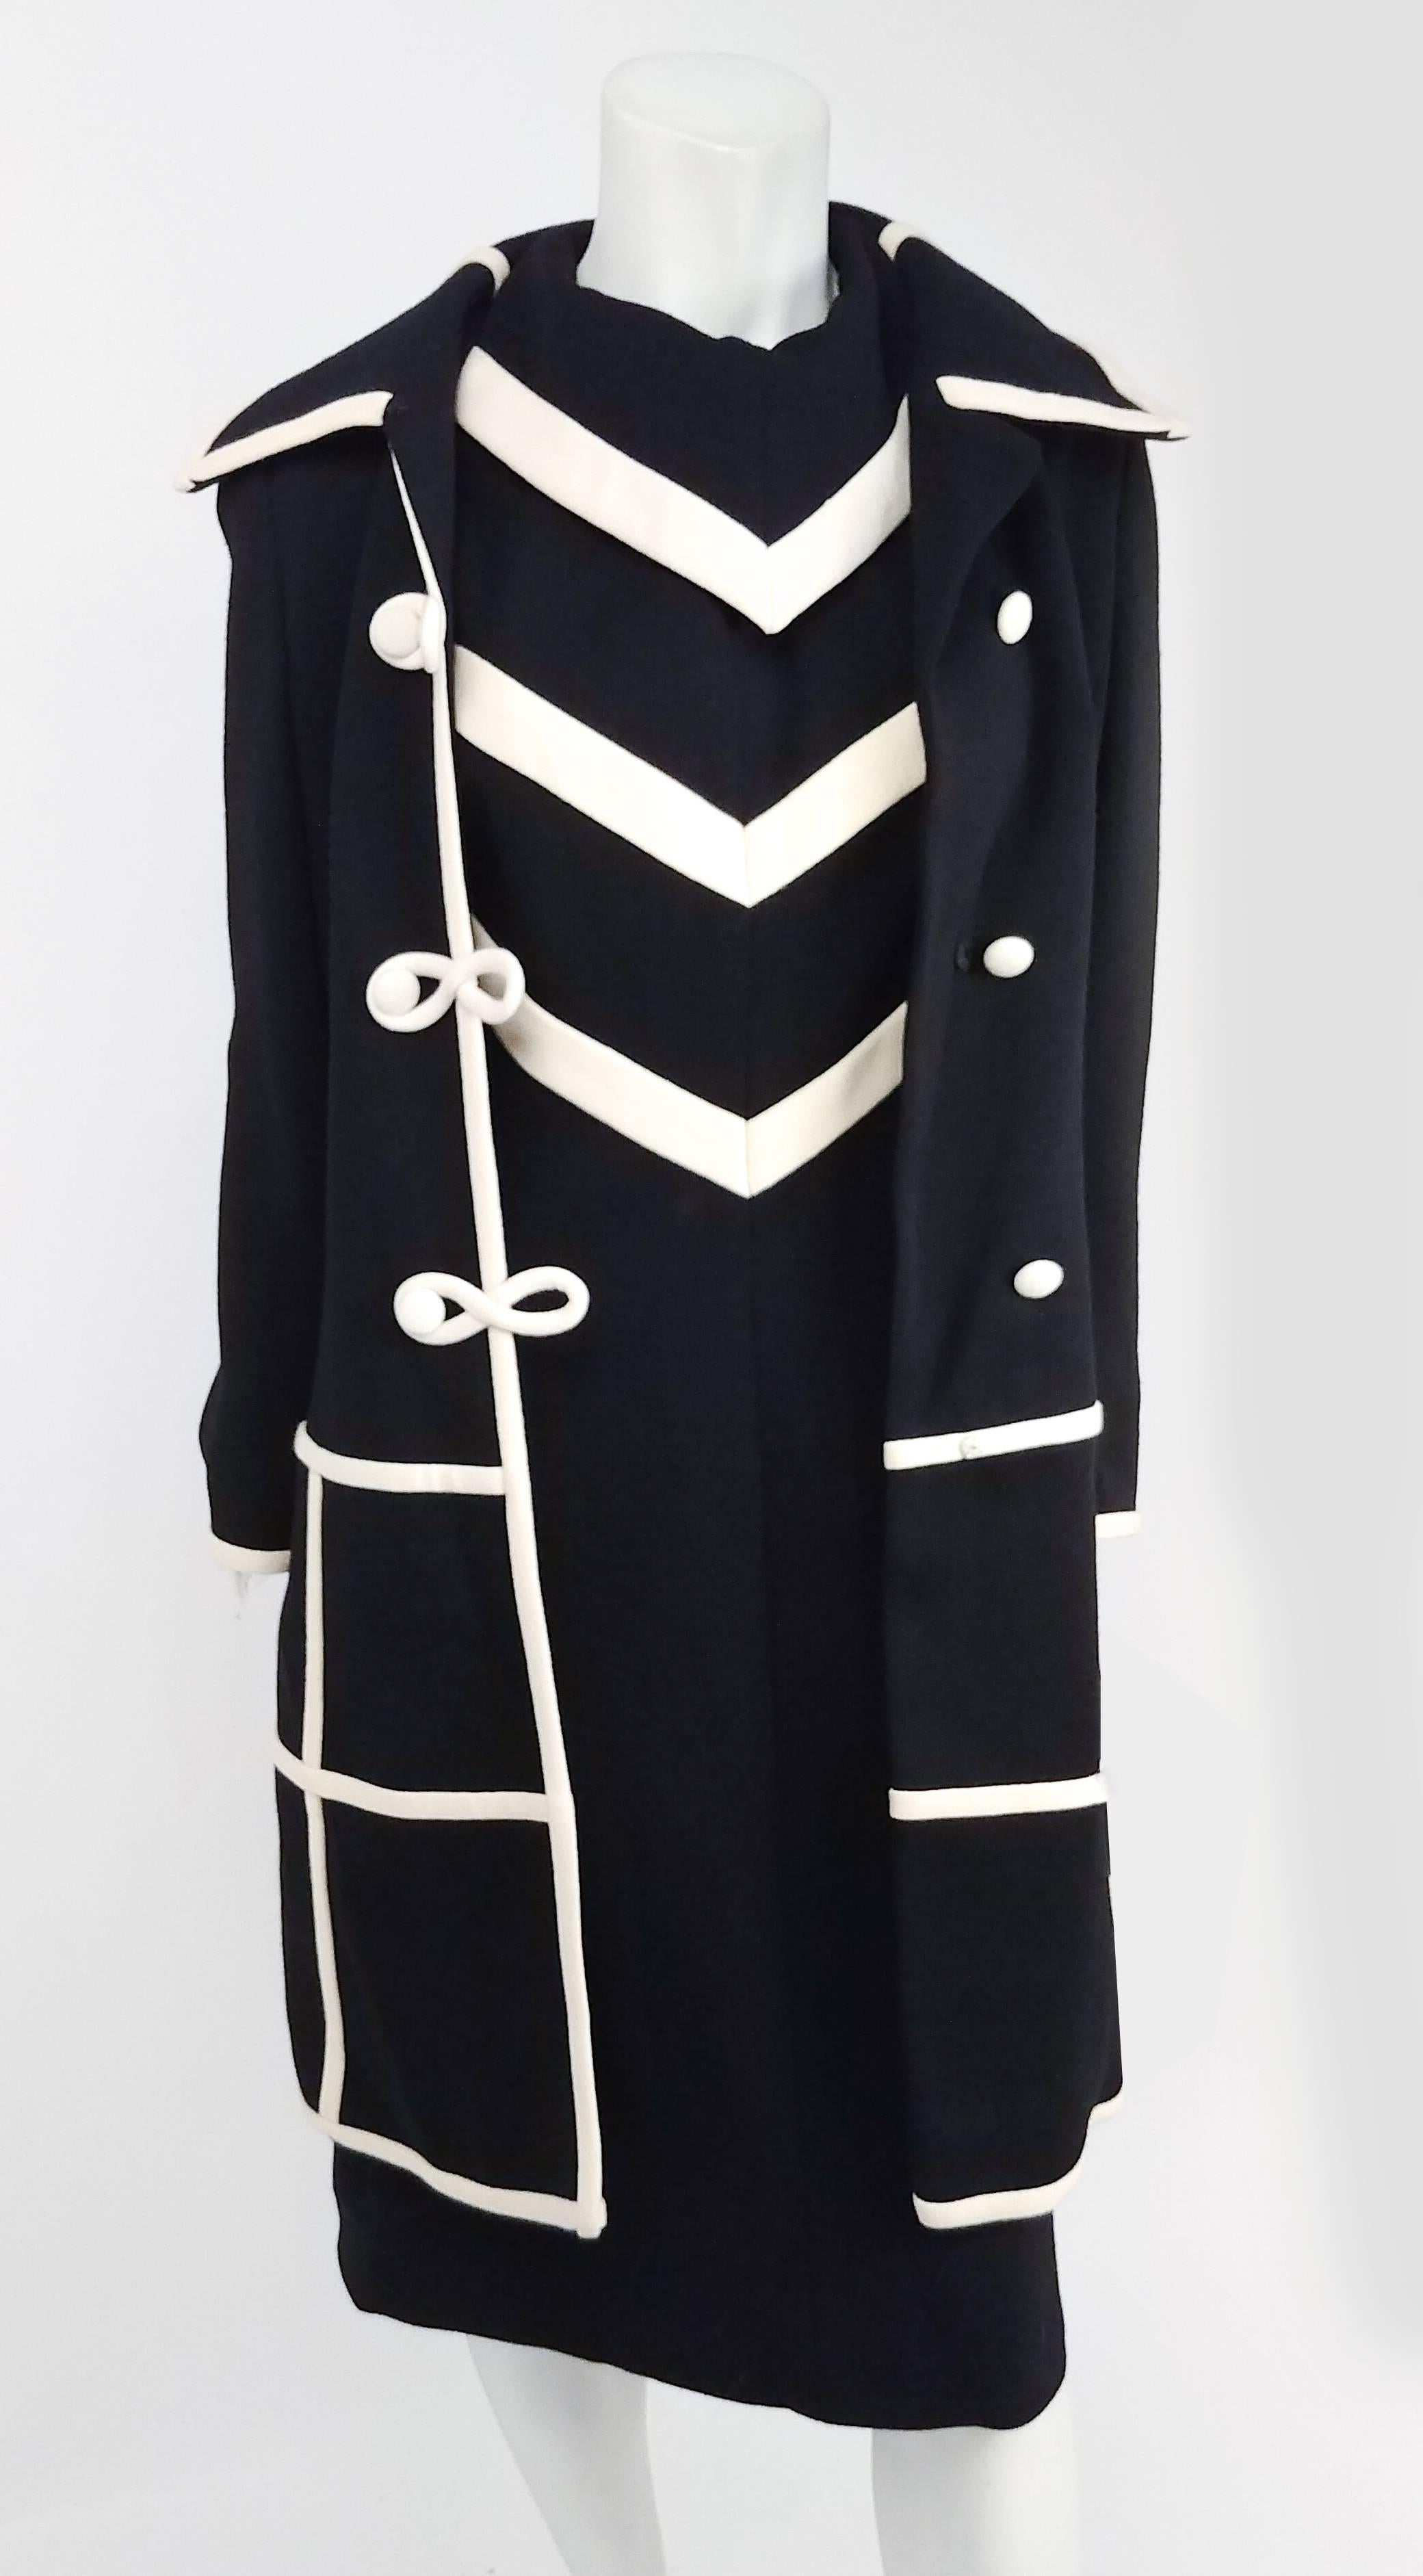 1960s Lilli Ann Black/White Two Piece Knit Dress Set. White contrast cage pattern on coat, matches white trim on collar and sleeves. Dress has front chevrons and kerchief collar that can flip up over the coat collar or tuck in. Zips up back. 